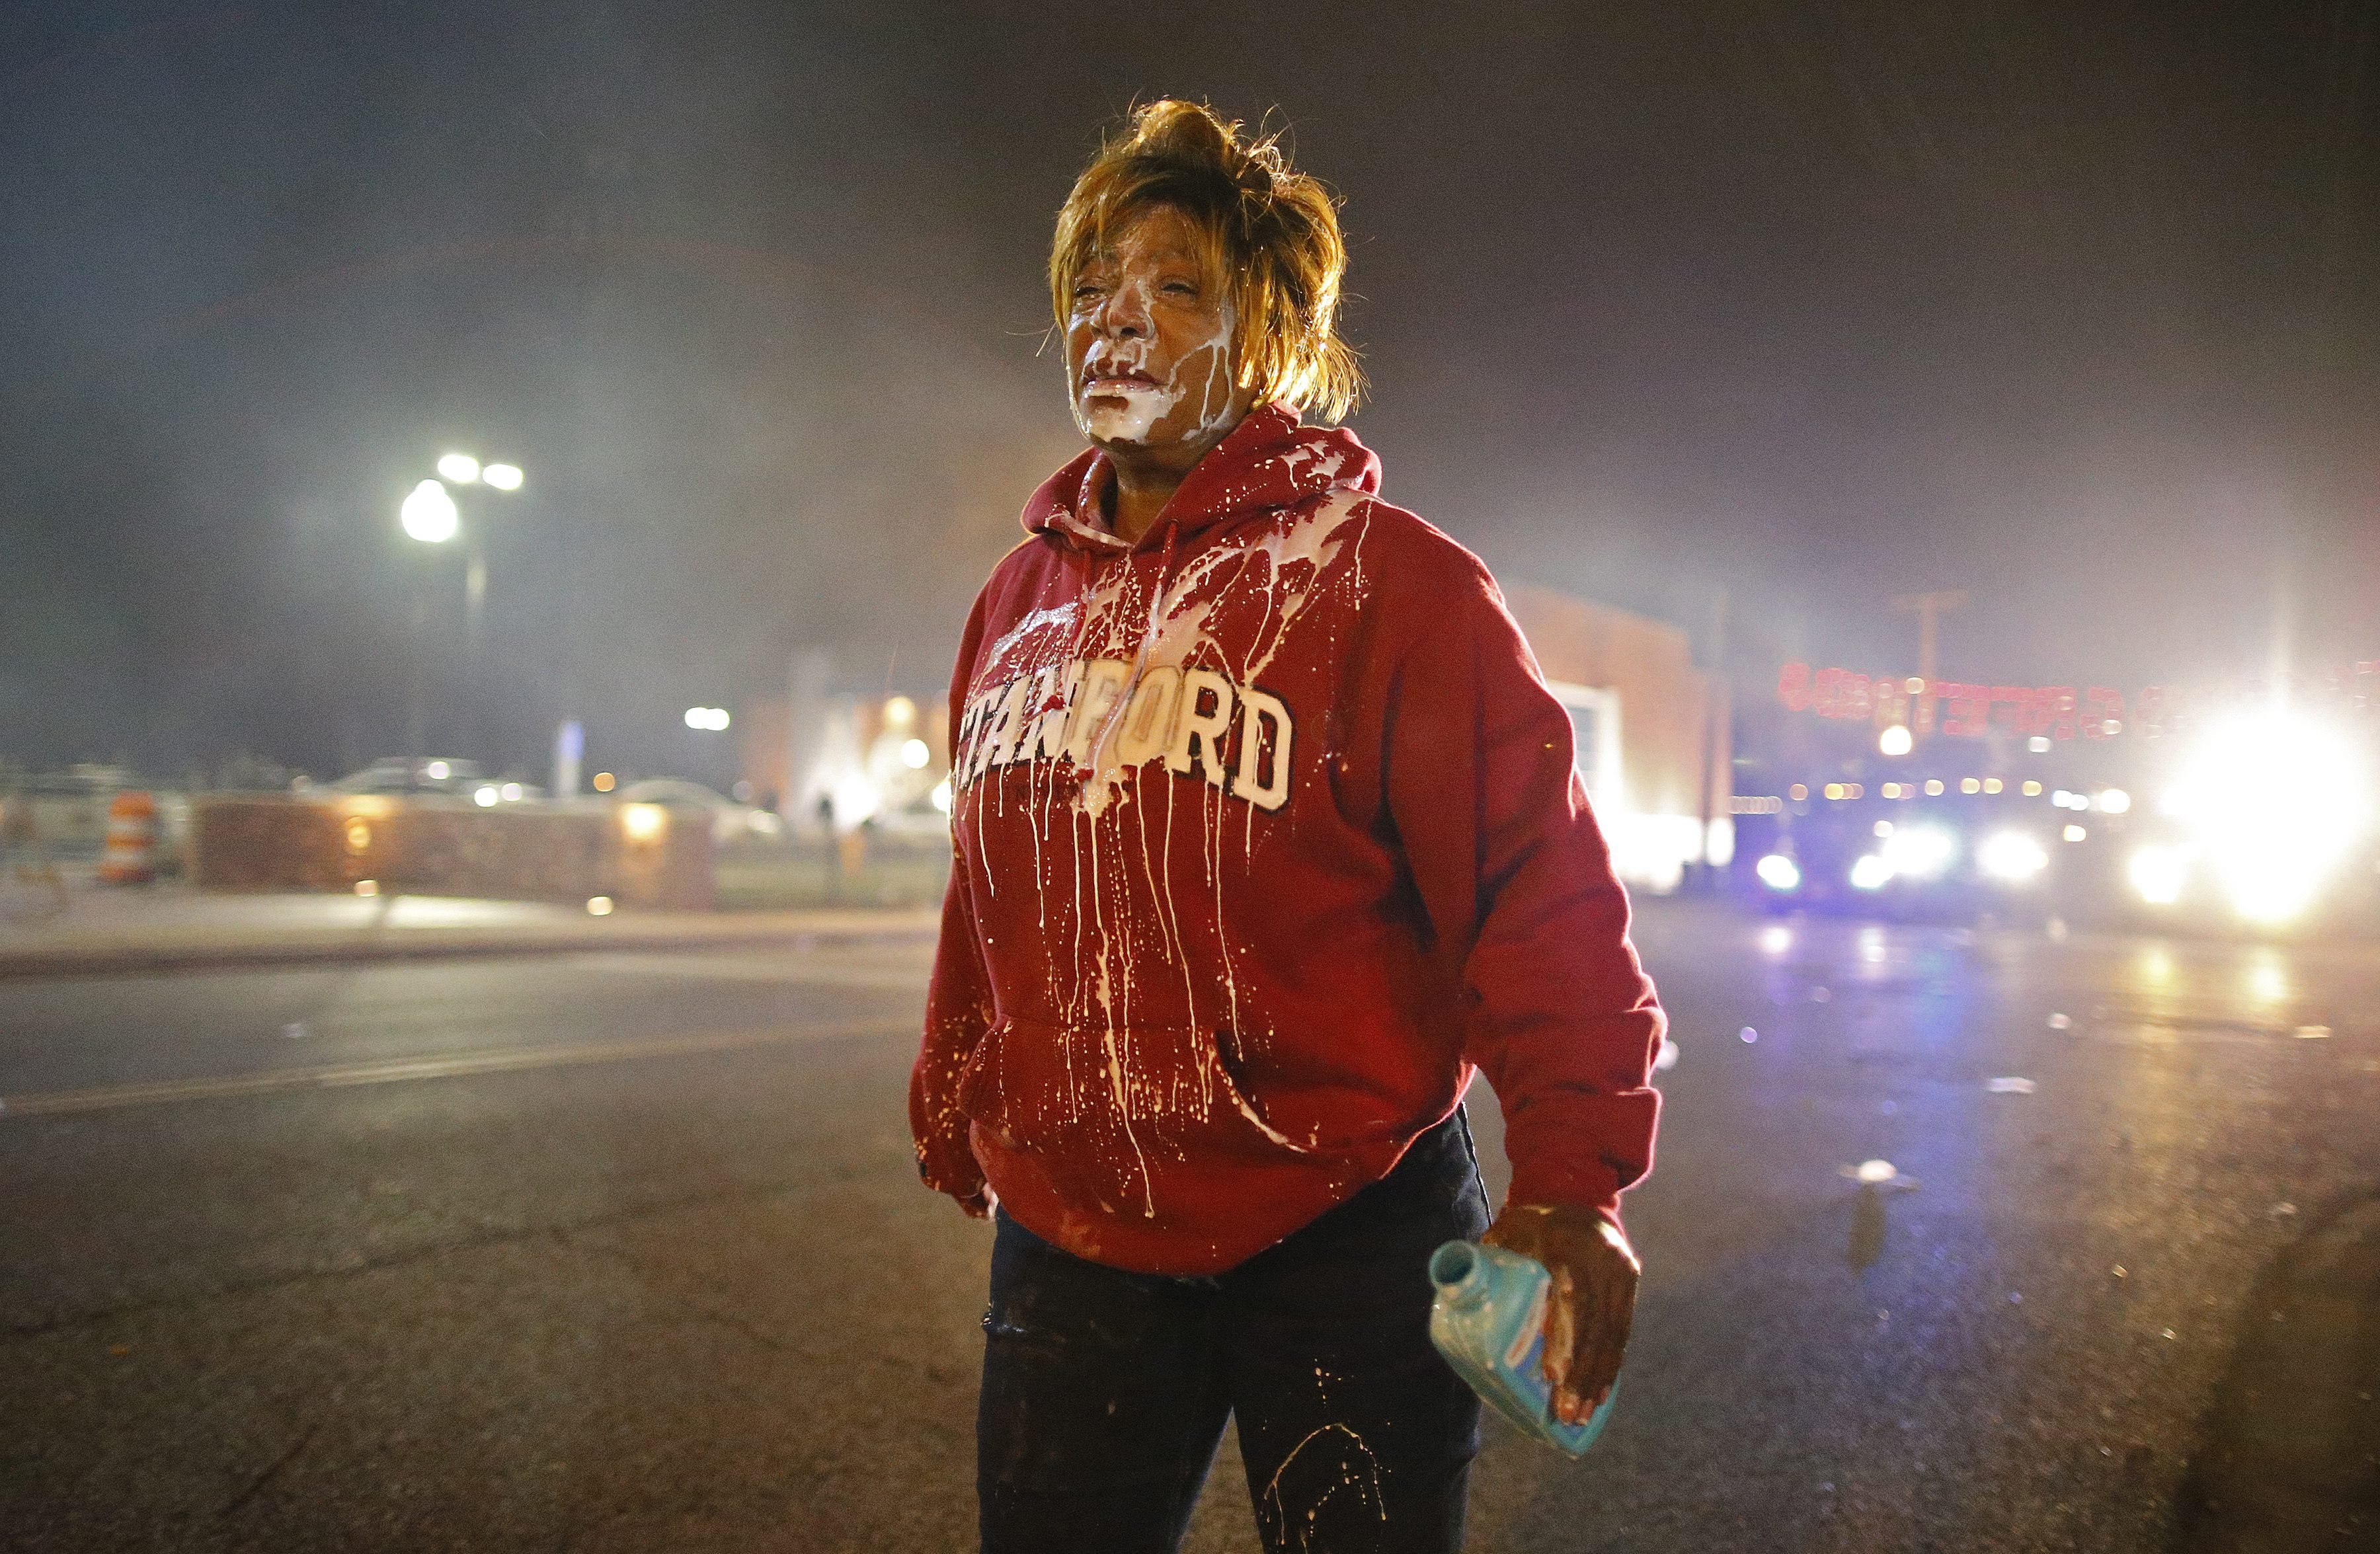 A demonstrator walks down the street after getting tear gas in her face and attempting to cleanse her eyes in Ferguson, Mo. on Nov. 24, 2014.